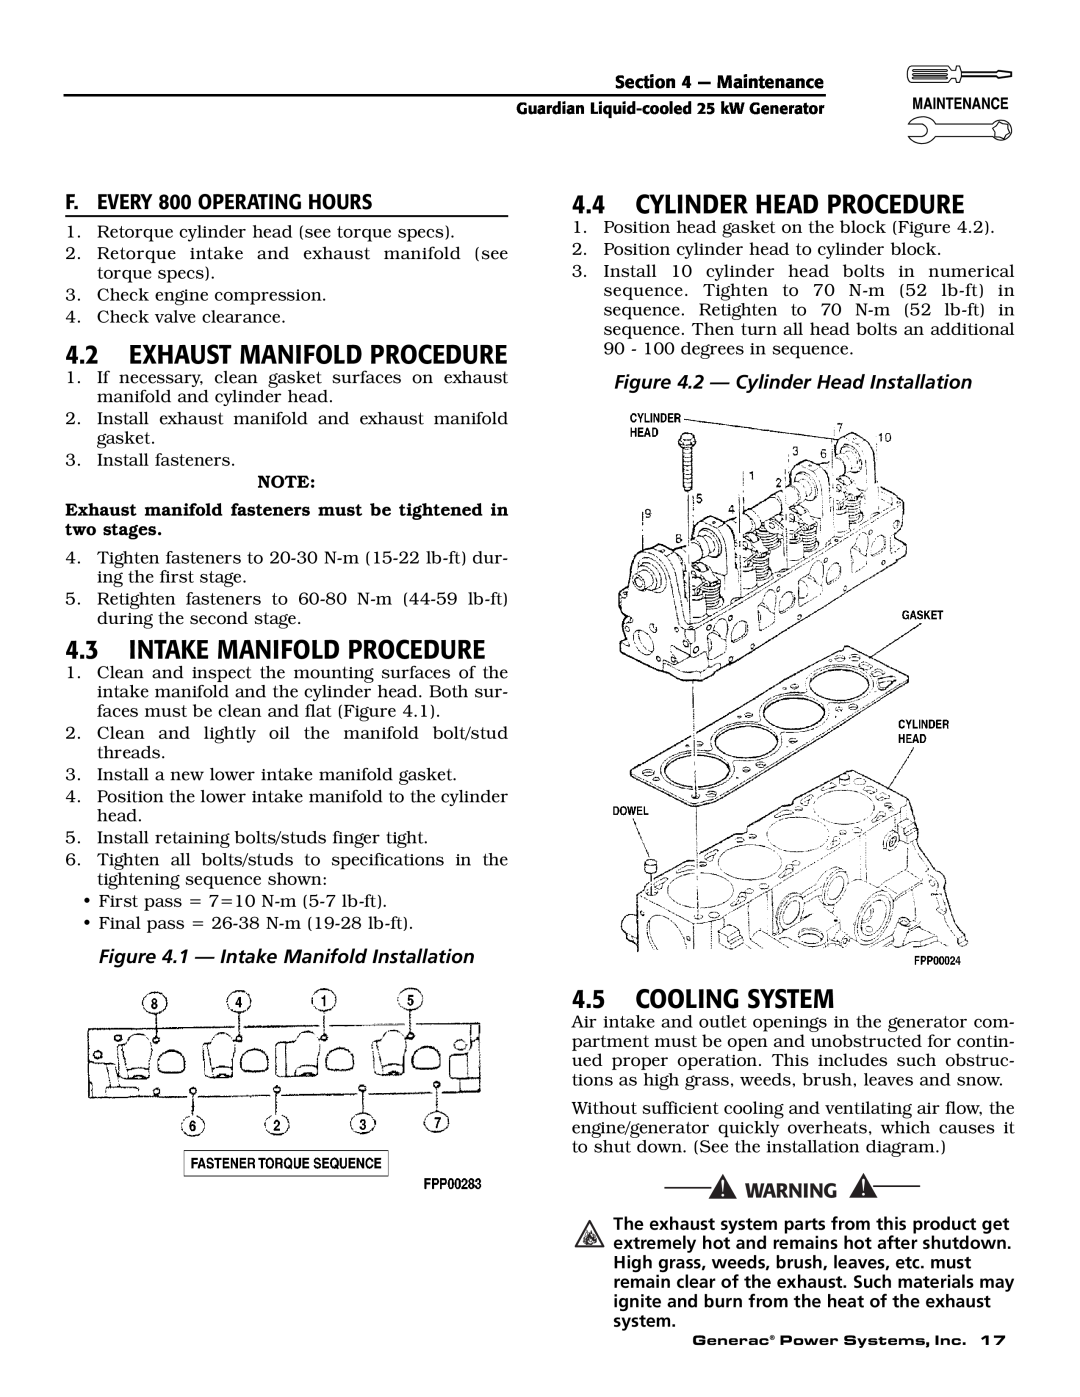 Generac Power Systems 005054-0, 005053-1 Exhaust Manifold Procedure, Intake Manifold Procedure, Cylinder Head Procedure 